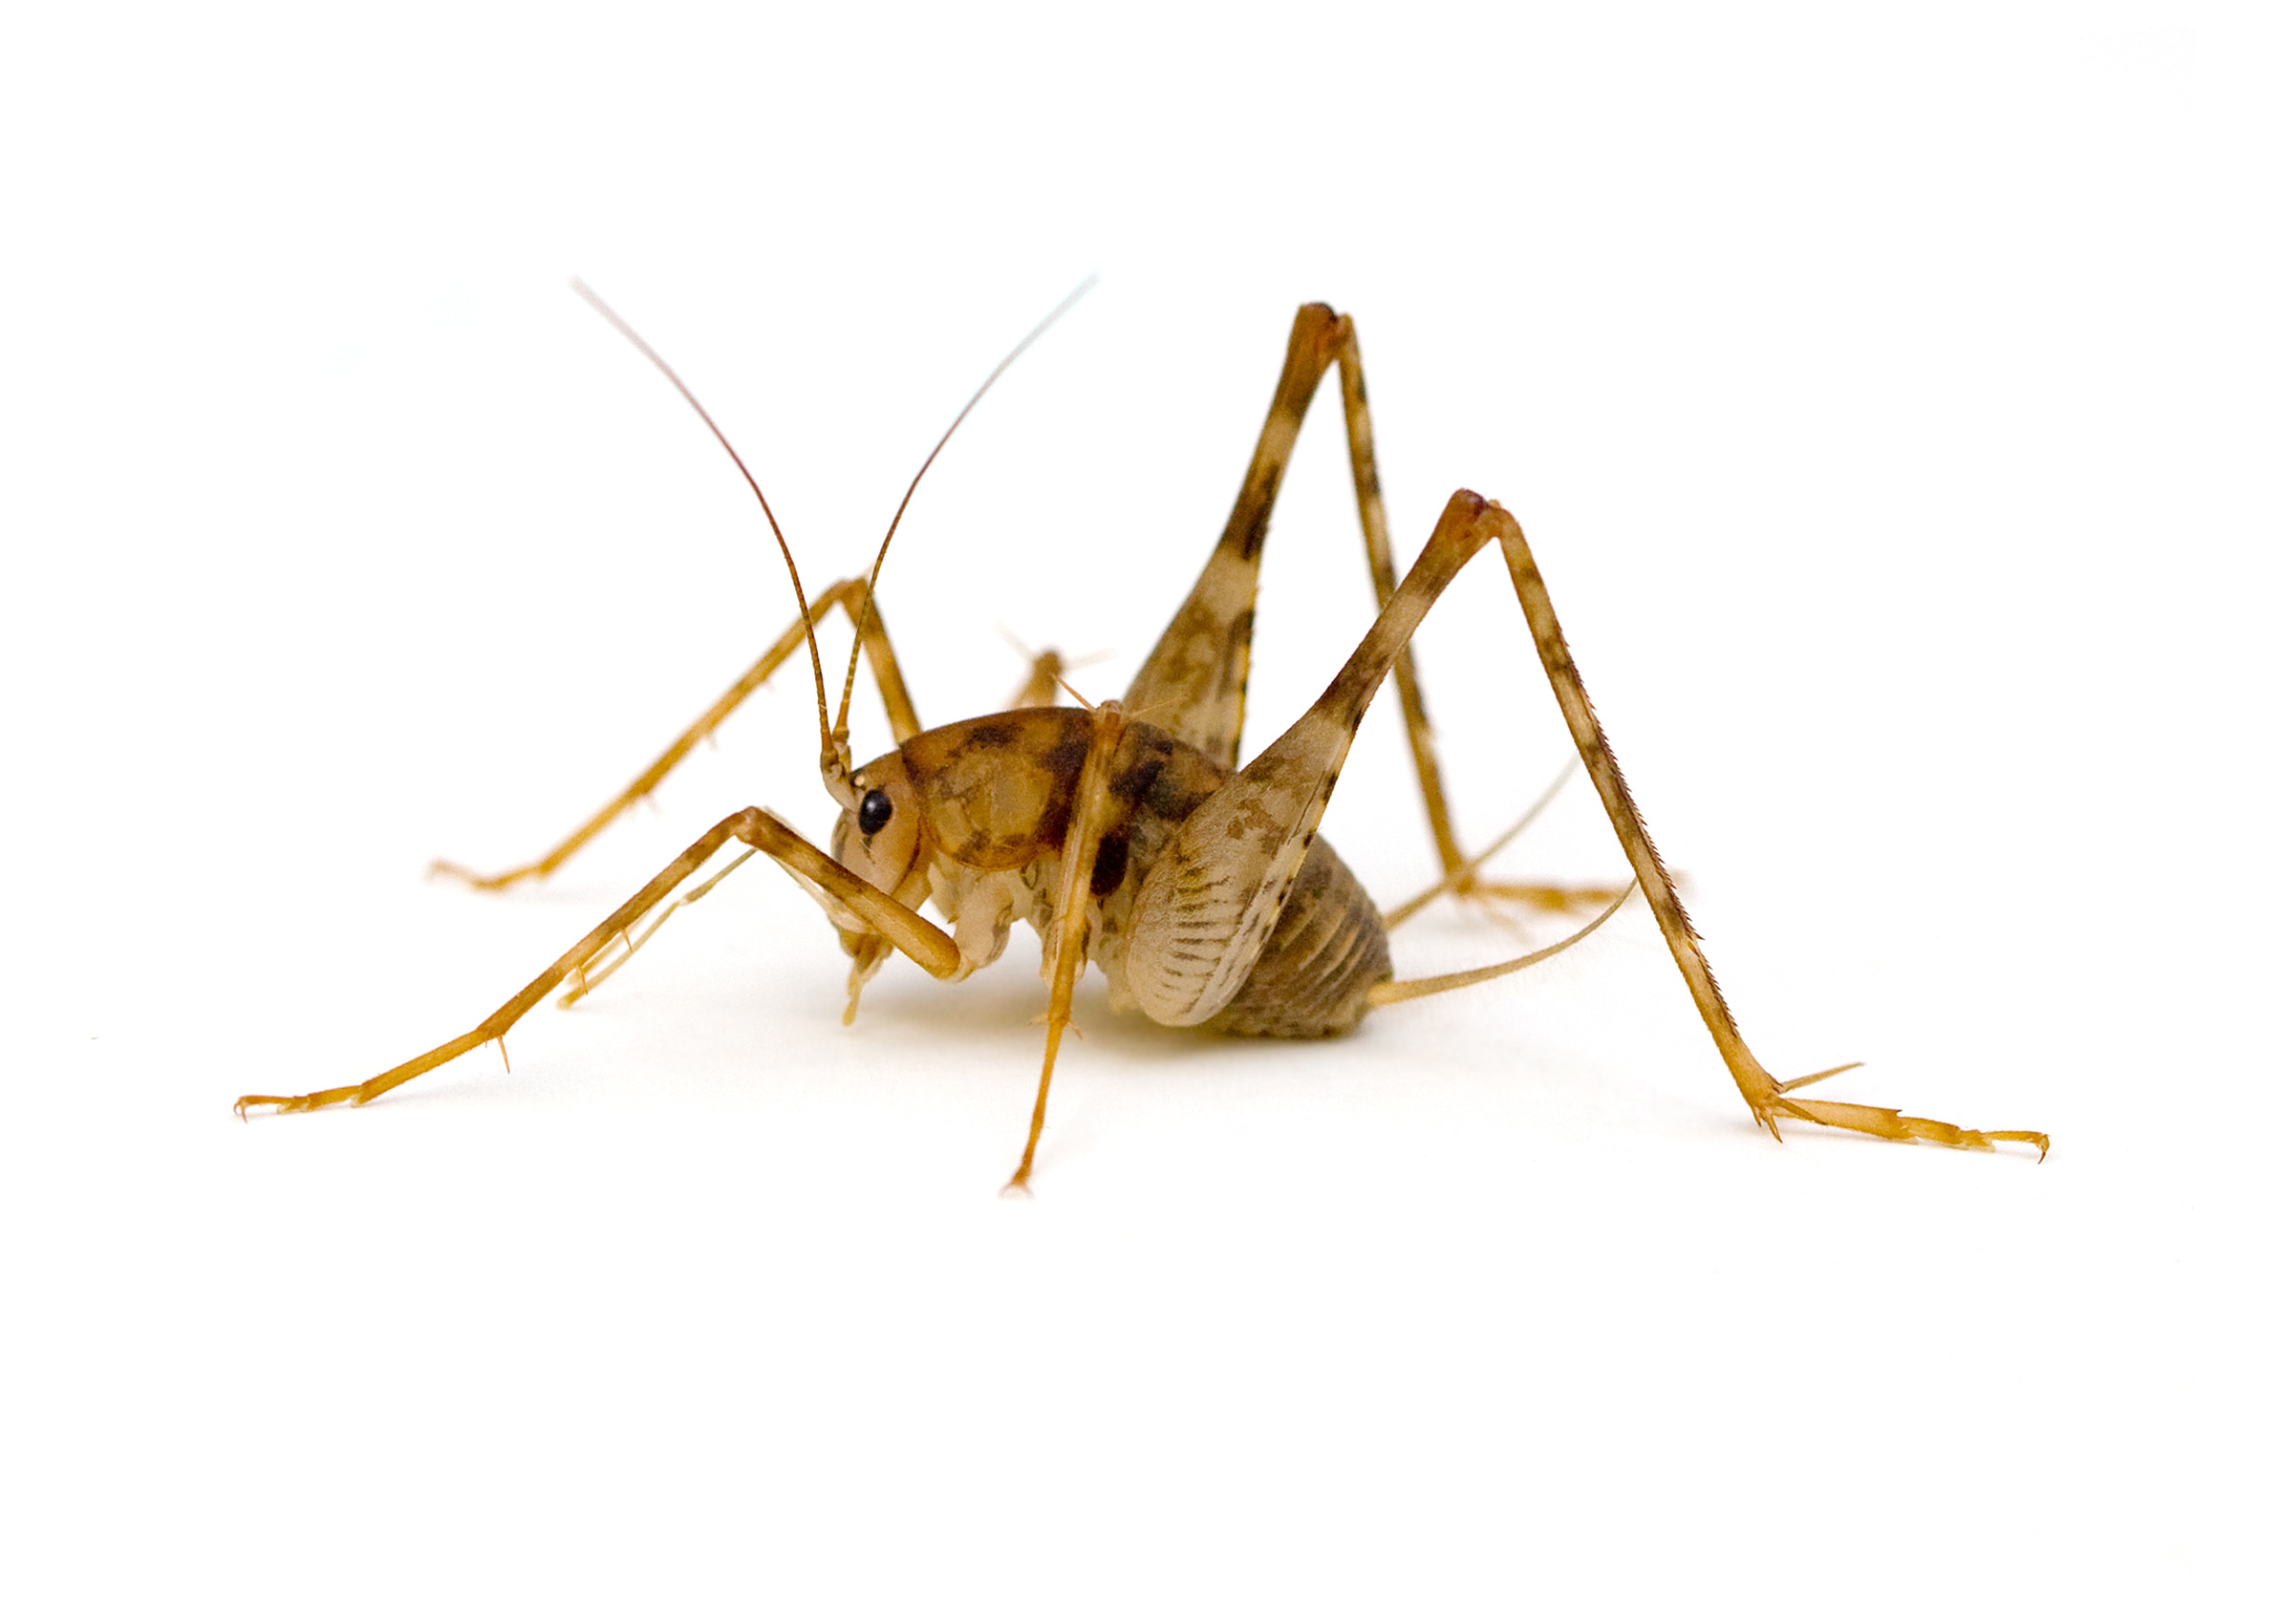 How to Get Rid of Houseplant Gnats - Leo's Pest Control - Pest Control &  Extermination Services